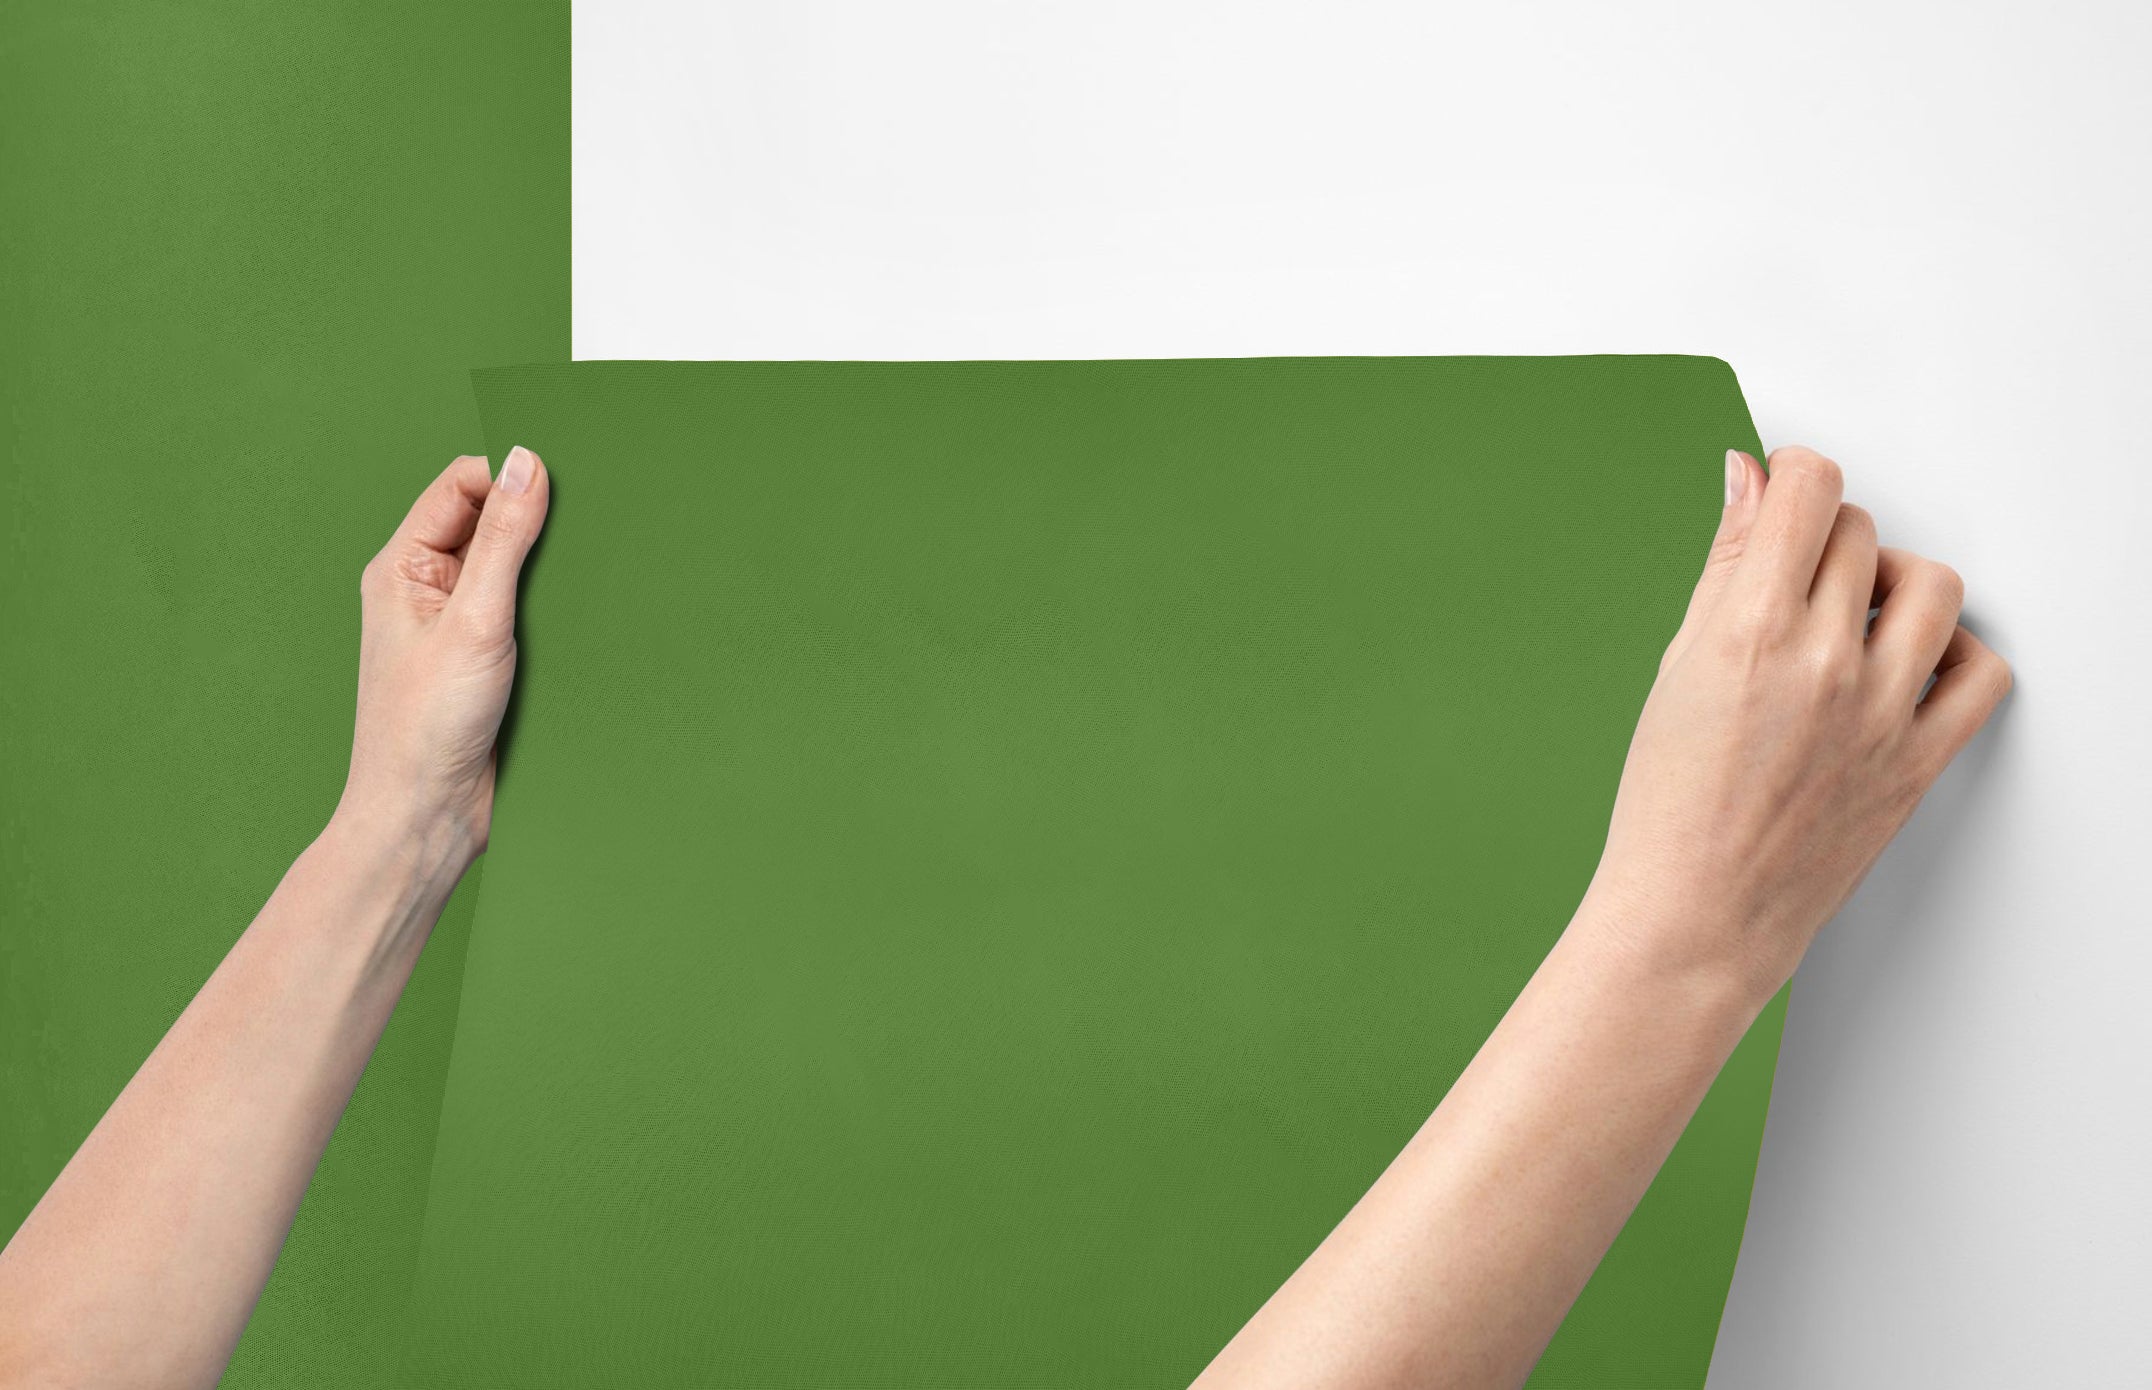 Peel & Stick Removable Re-usable Paint - Color RAL 6017 May Green - offRAL™ - RALRAW LLC, USA